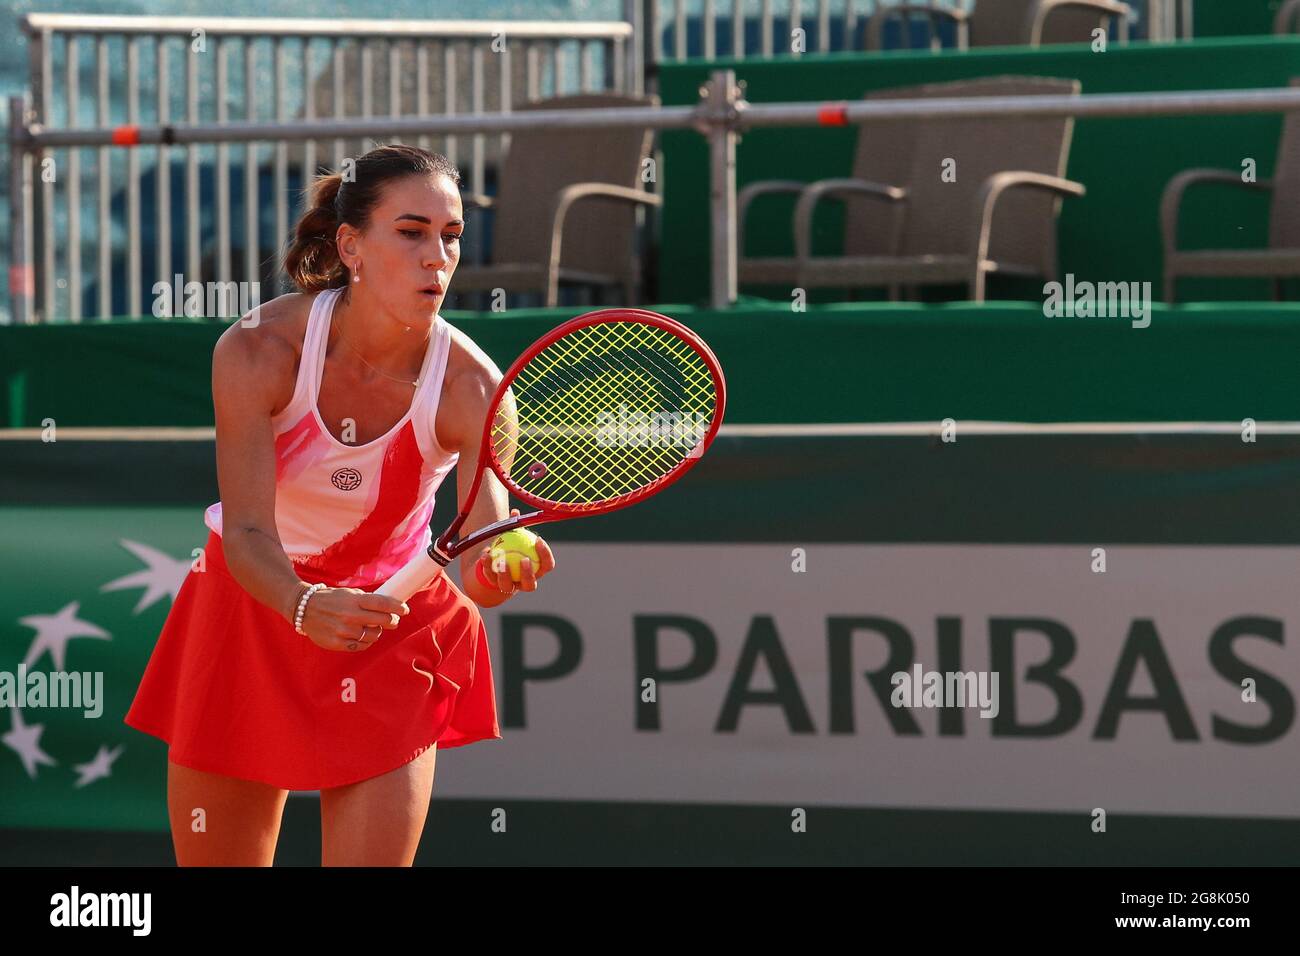 Nuria Parizzas Diaz (SPAIN) against Magdalena Frech (POLAND) seen in action during the BNP Paribas Poland Open Tournament (WTA 250 category) in Gdynia